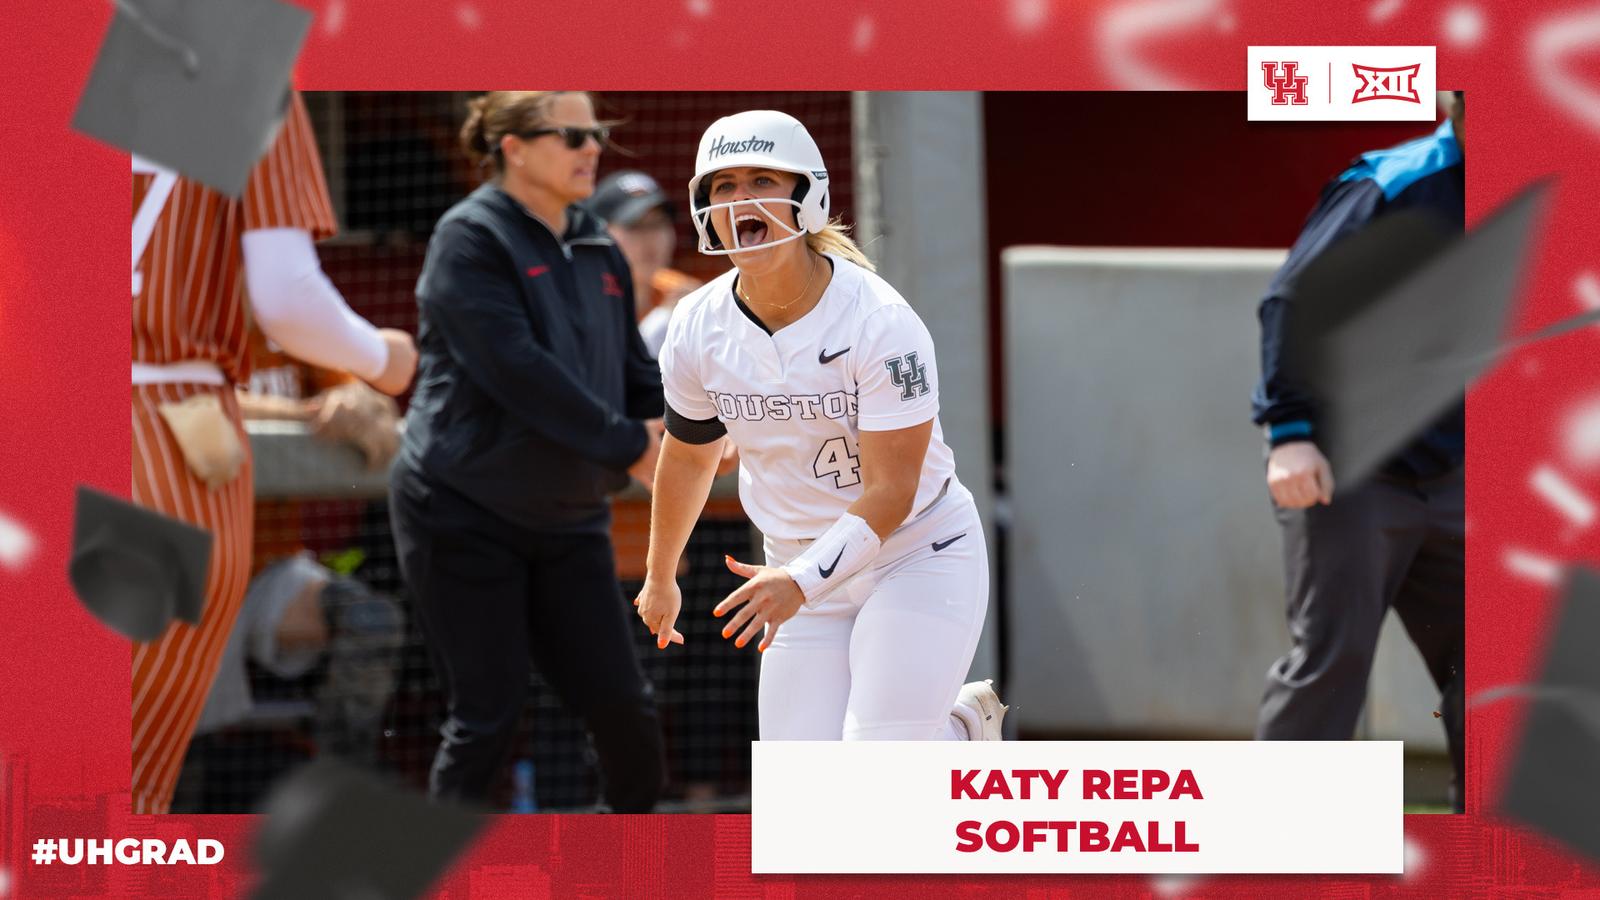 Katy Repa: From Softball Standout to Mechanical Engineering Graduate at UH